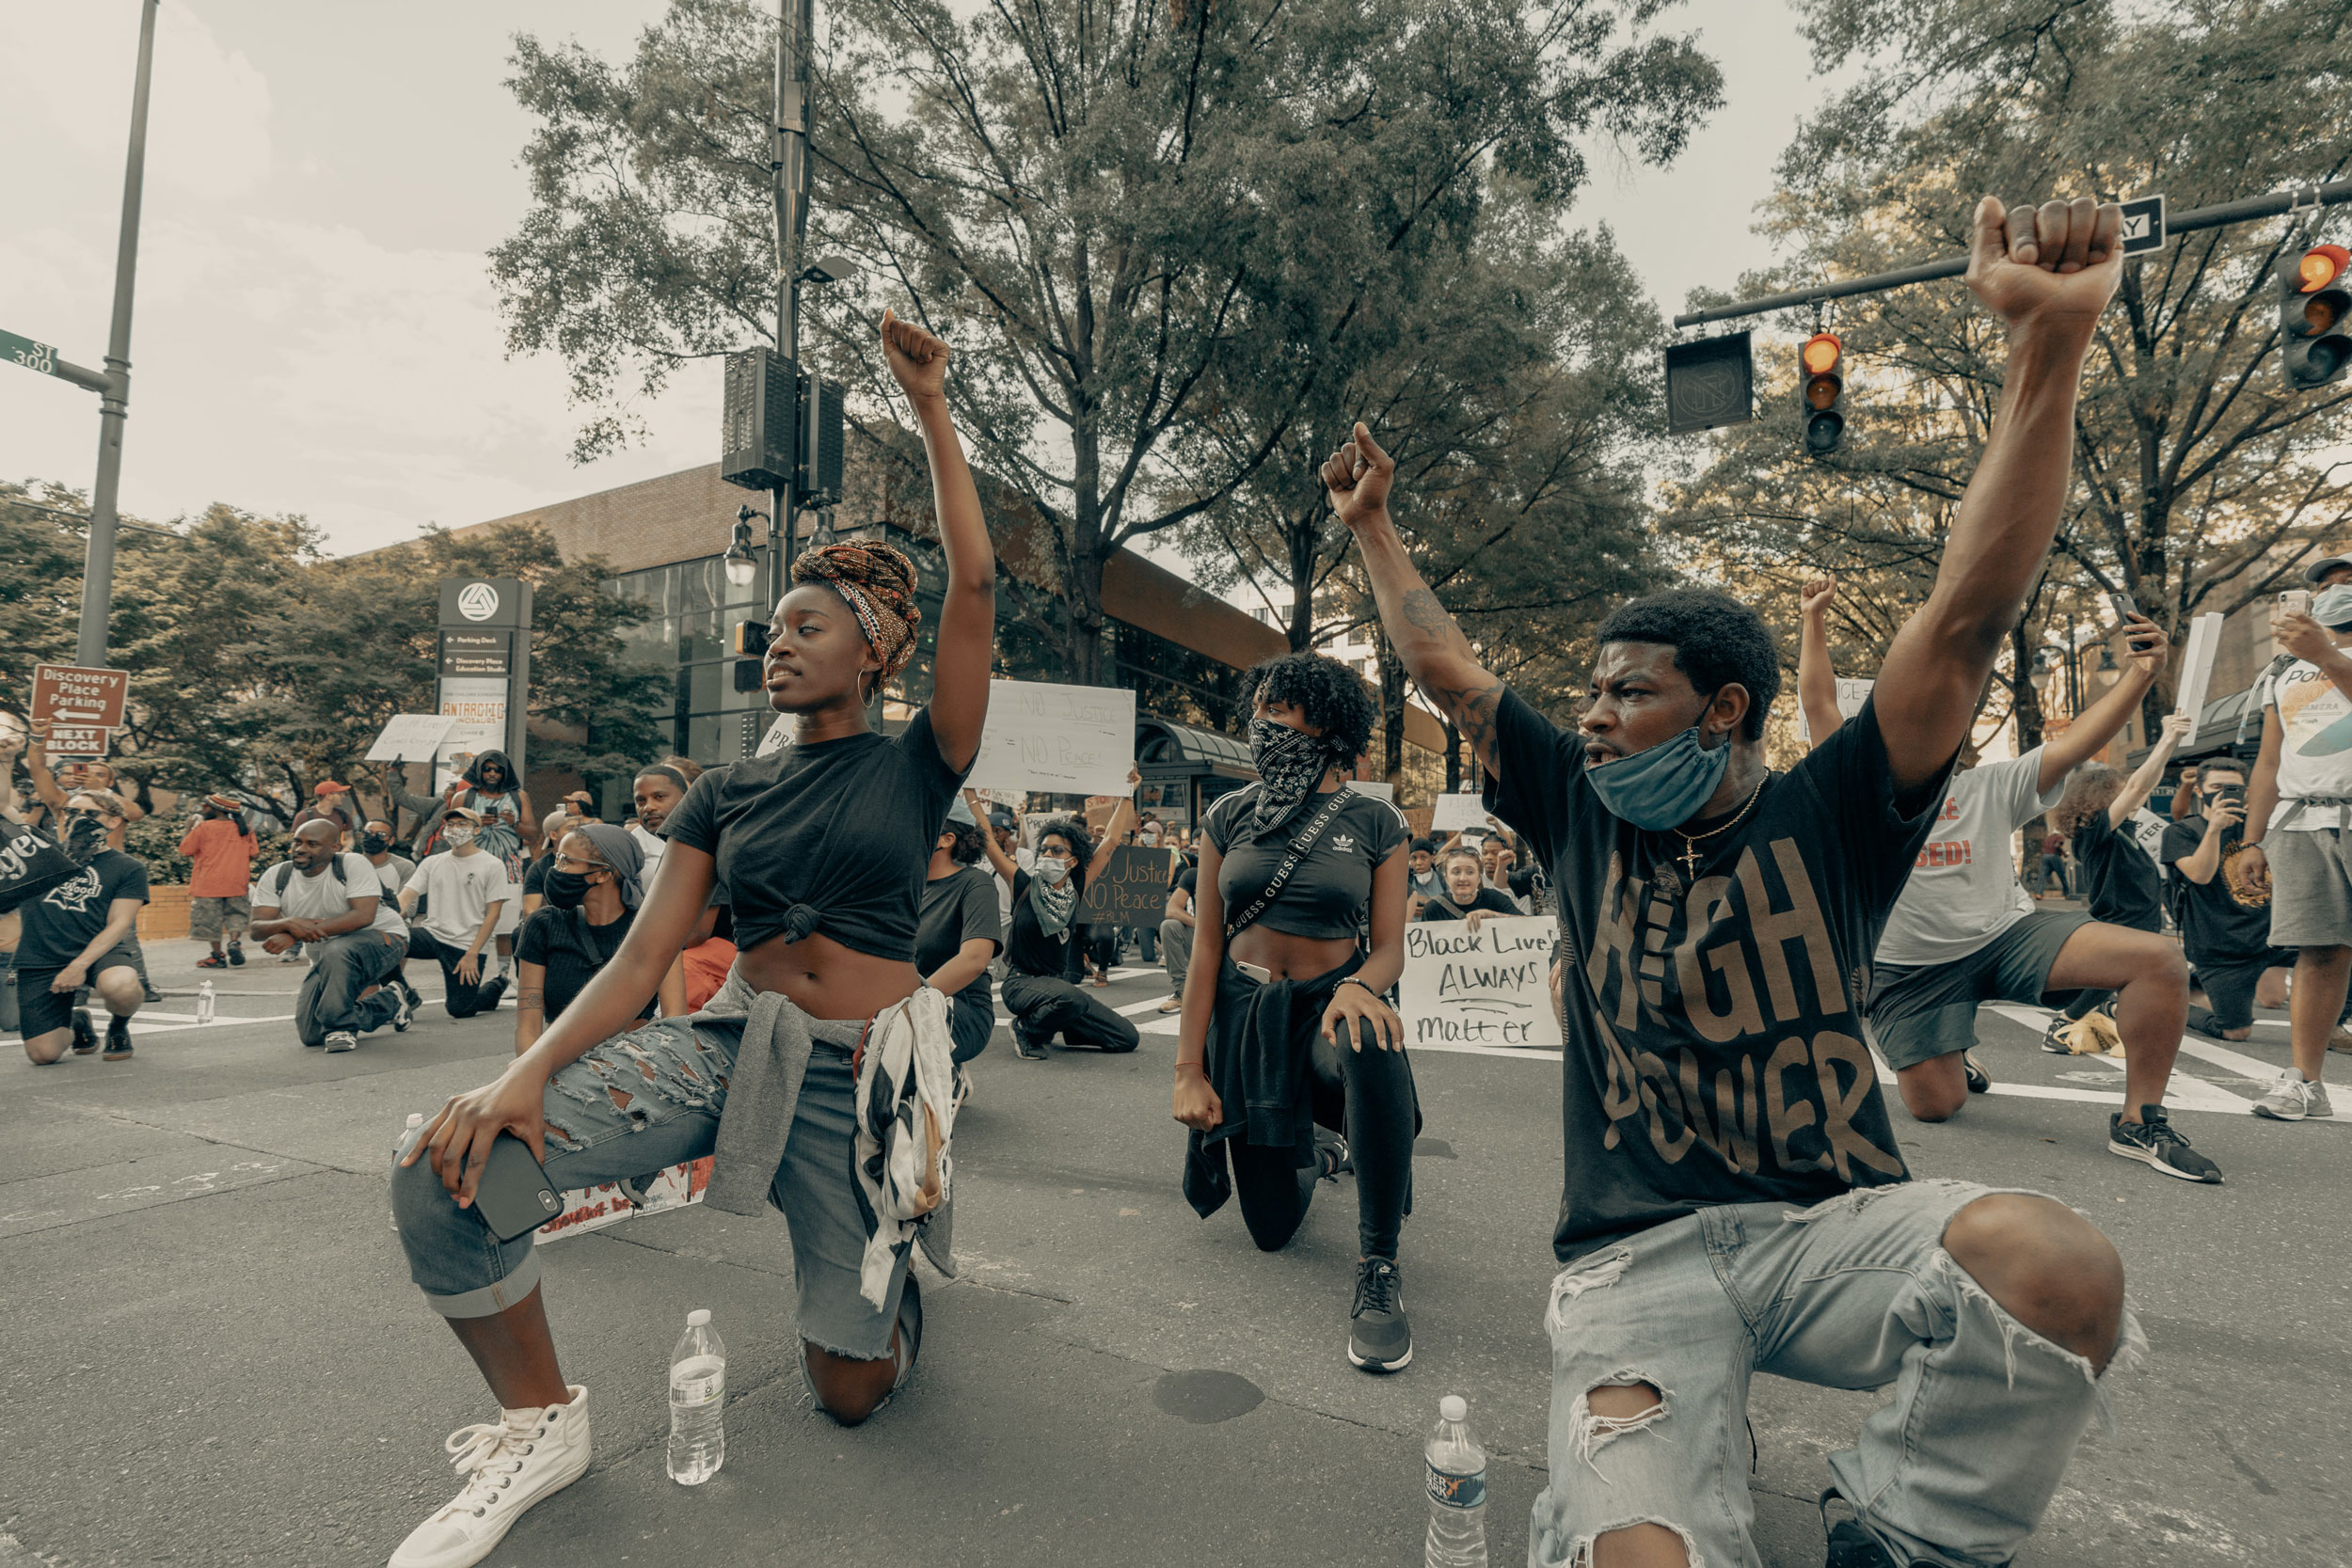 People raising their fists at a Black Lives Matter protest